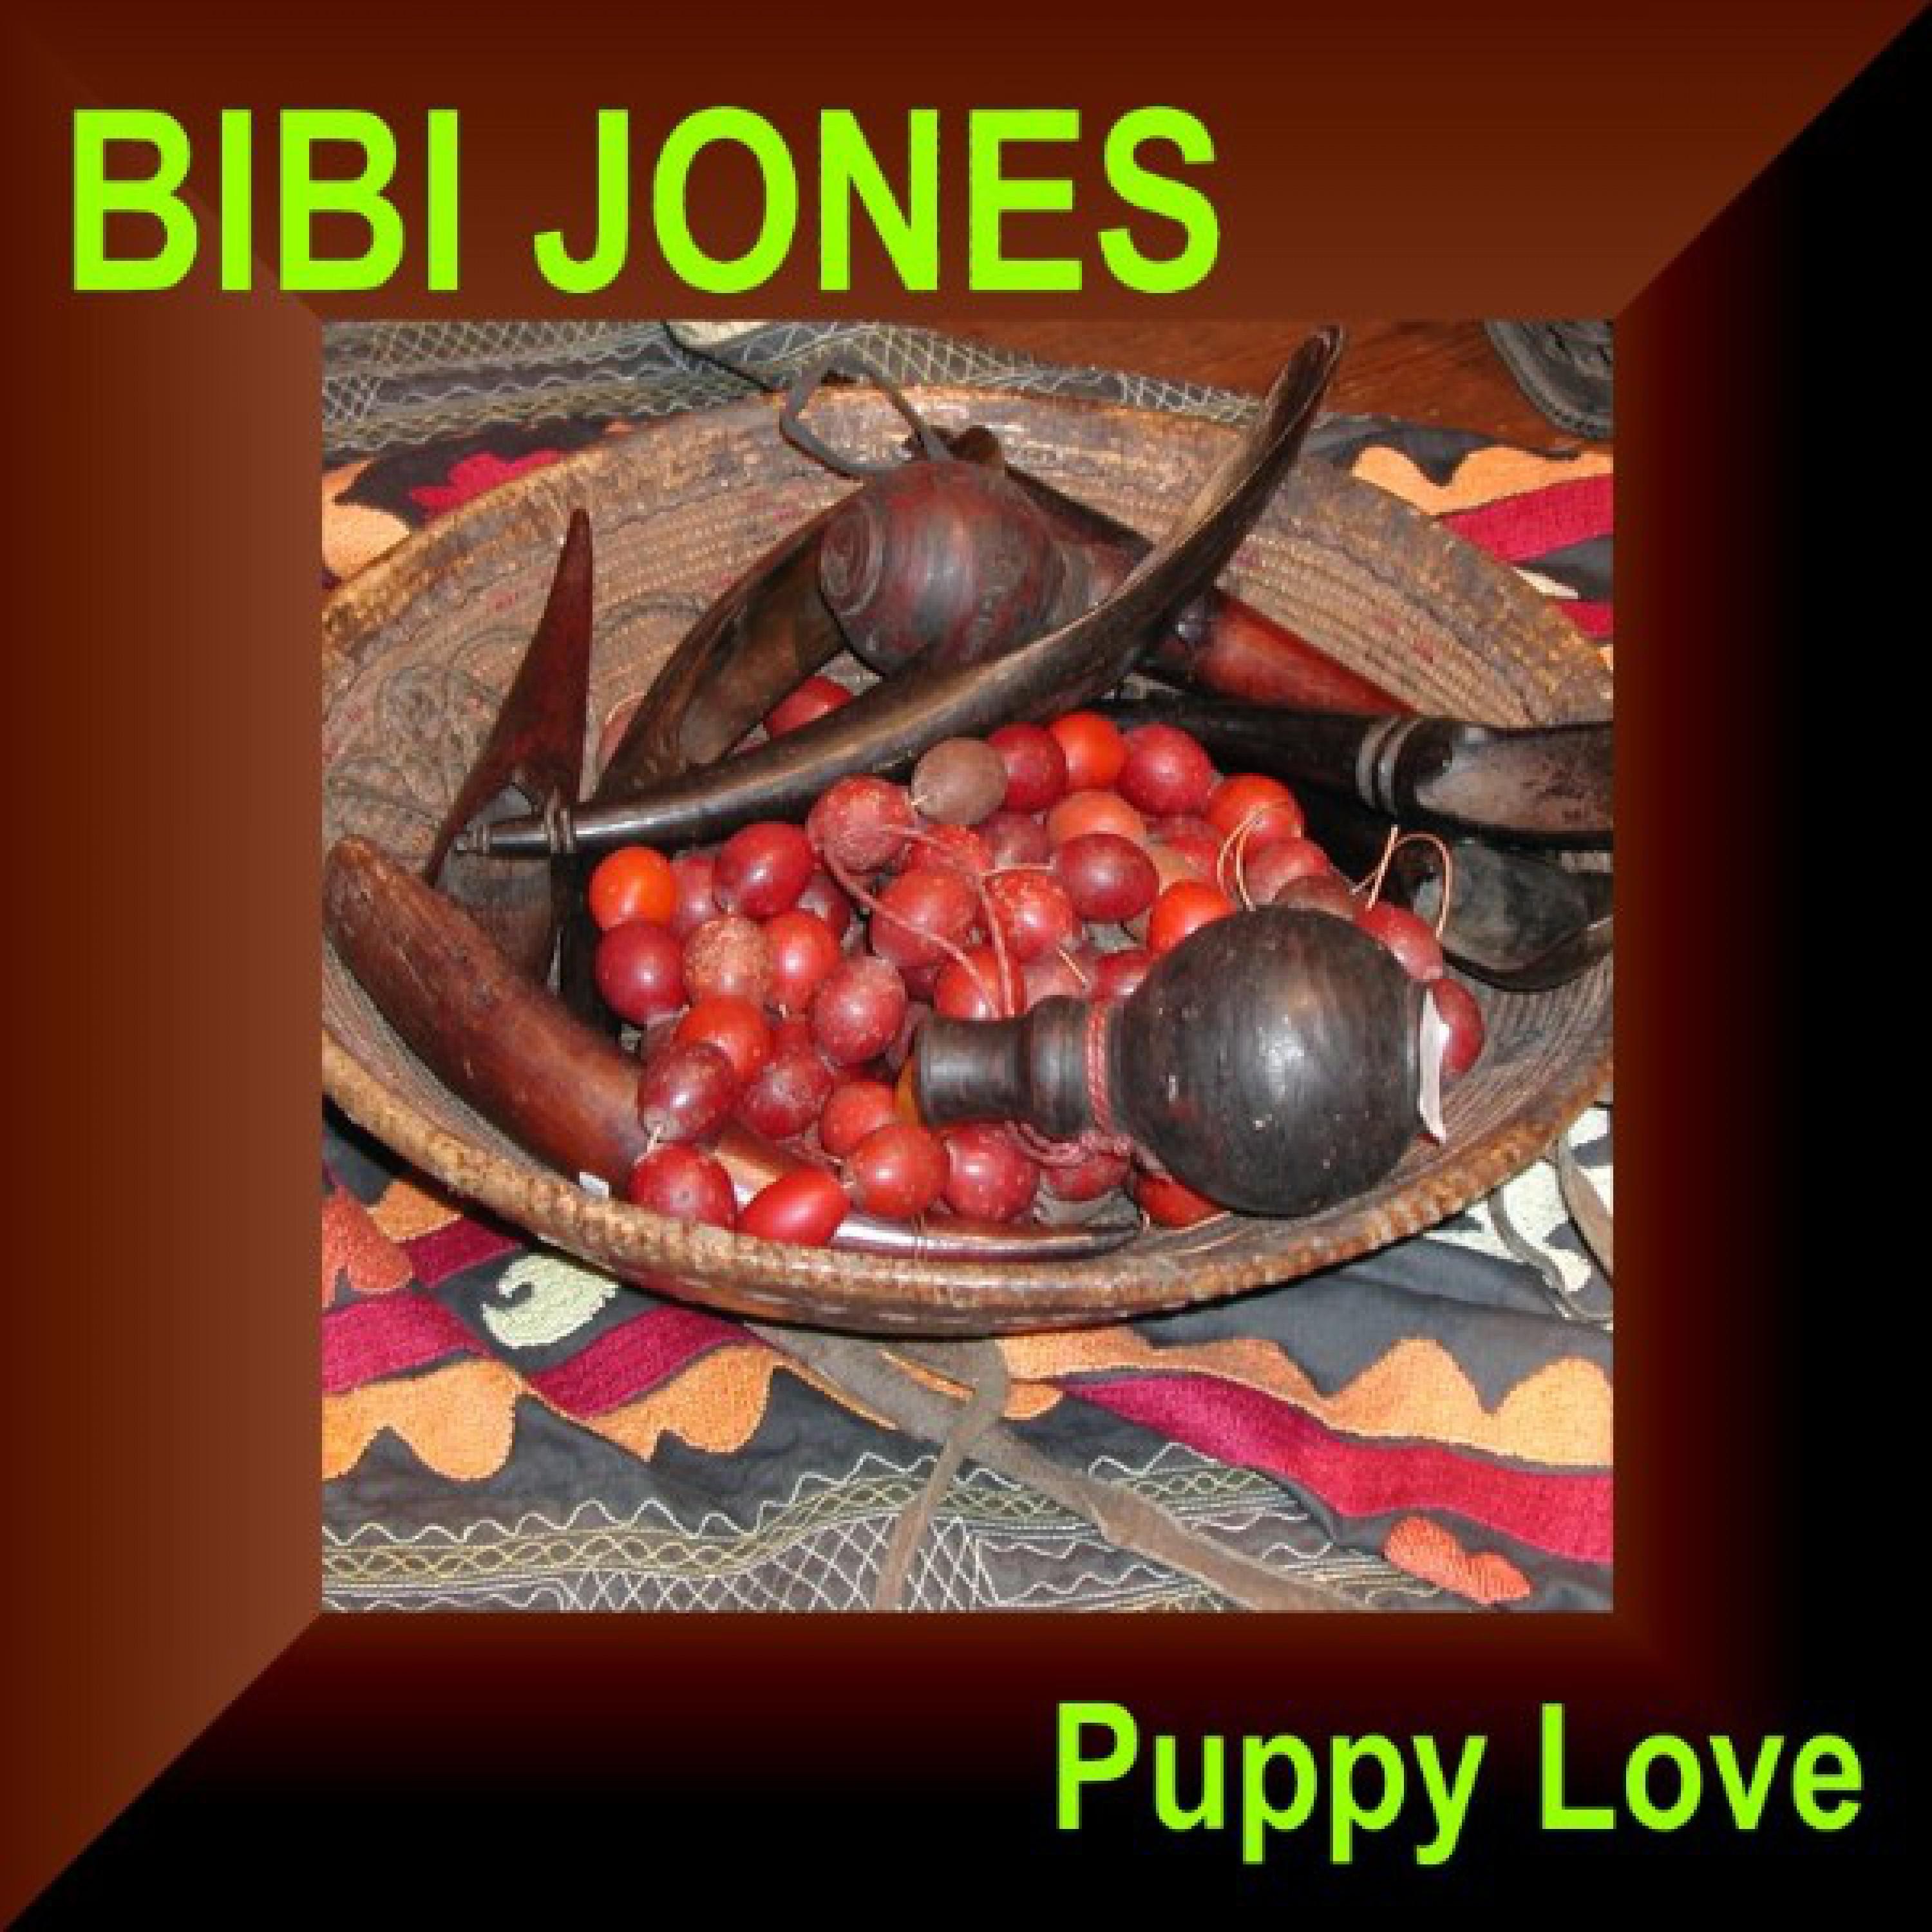 Bibi Johns - I Wish I Was a Puppet On a String